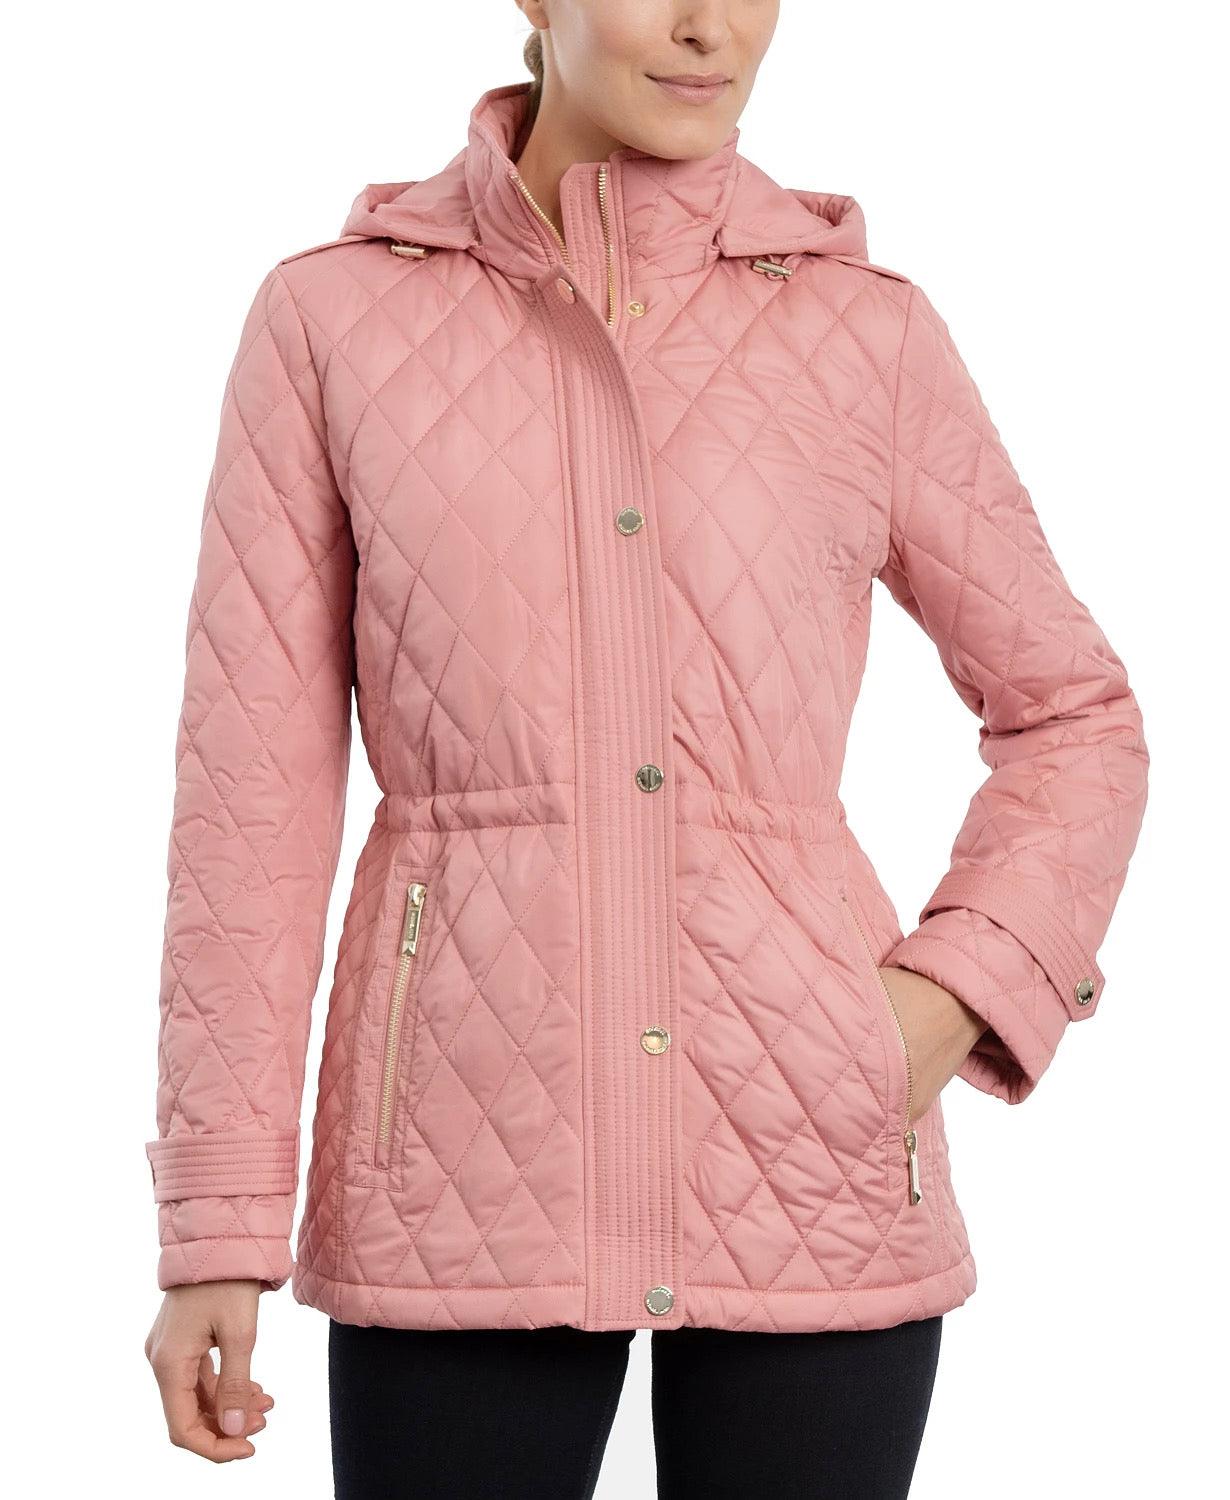 Michael Kors Women's Hooded Quilted Anorak Coat Jacket XS Dusty Rose P –  Bristol Apparel Co